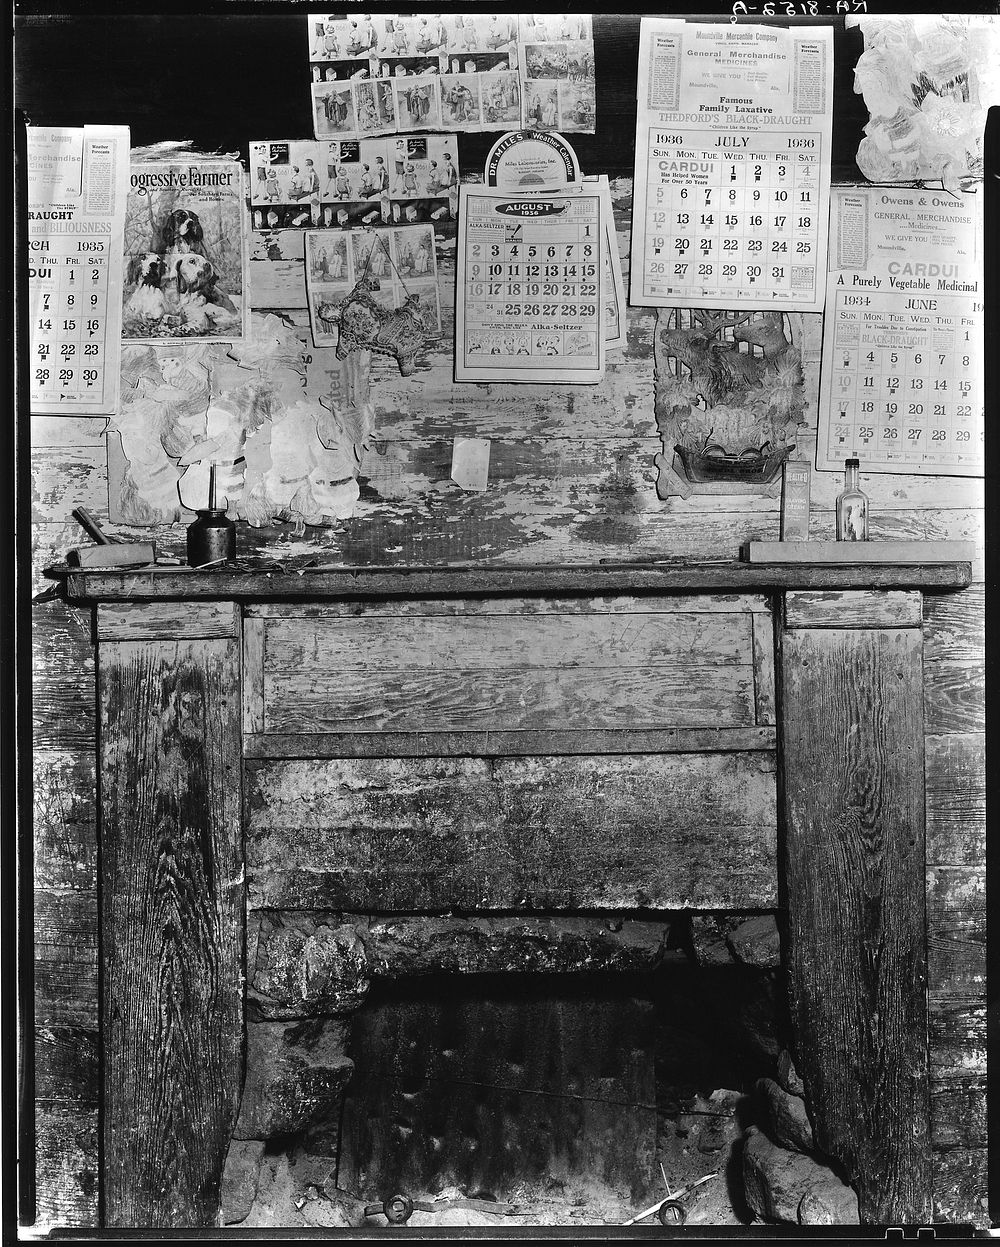 Fireplace in Frank Tengle's home. Hale County, Alabama. Sourced from the Library of Congress.